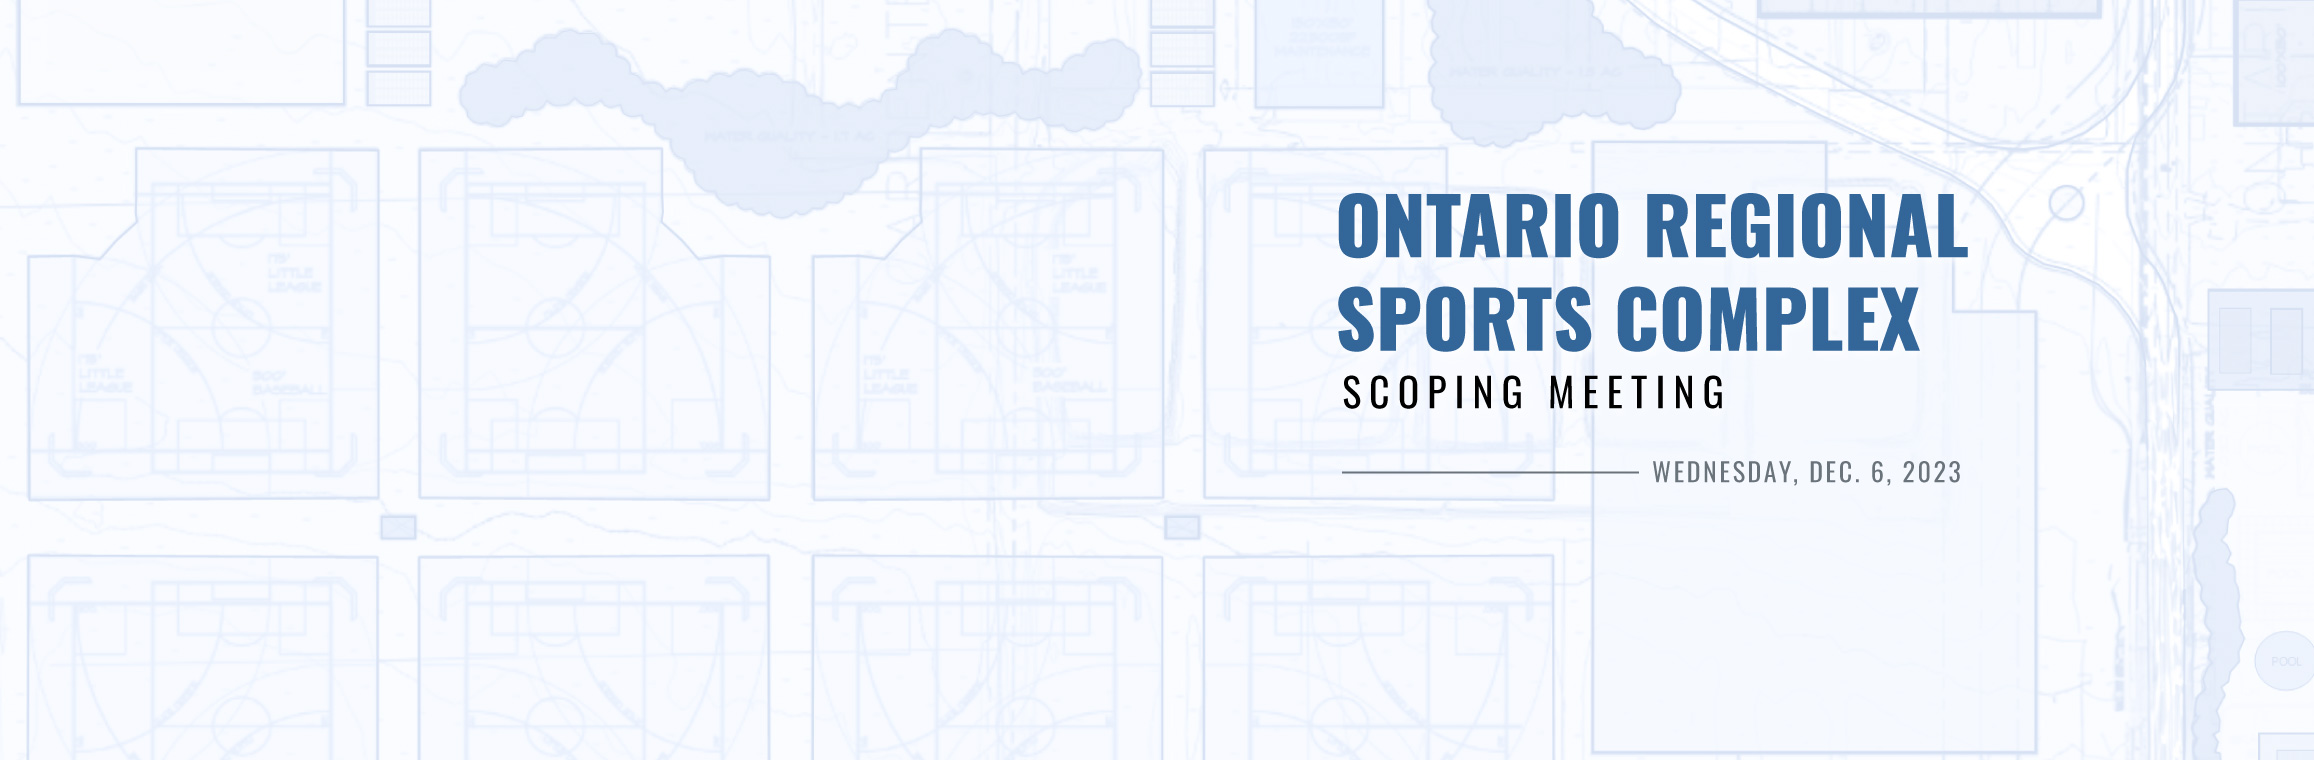 banner with faint image of a development draft as the background, the right side of the banner reads "Ontario Regional Sports Complex Scoping Meeting, Wednesday December 6, 2023"